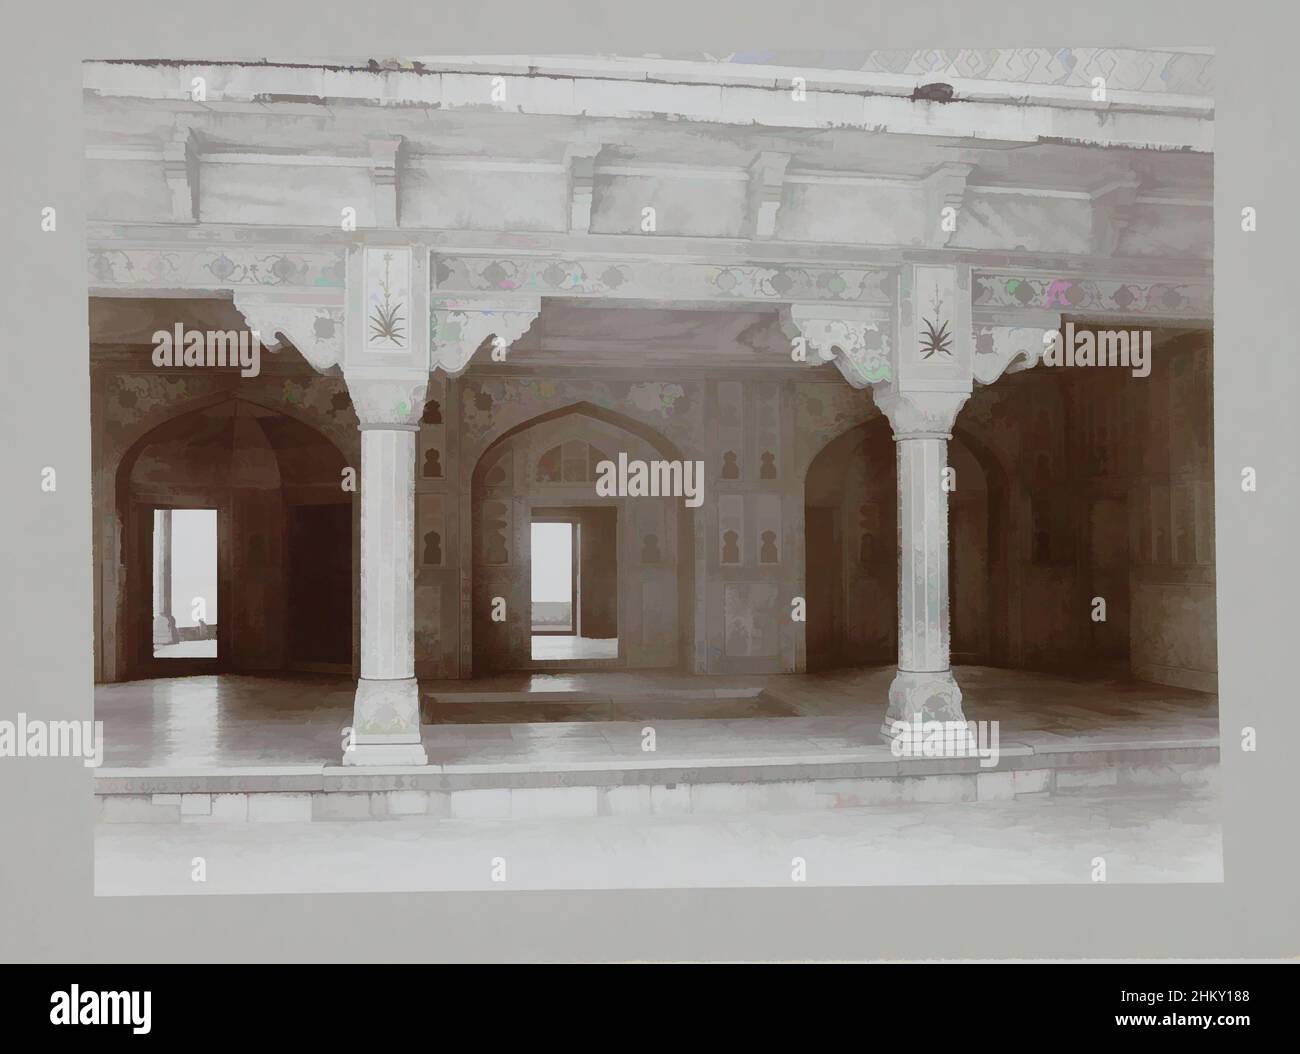 Art inspired by Inside of Musamman Burj, Inside of the tower Musamman Burj which is part of the Fort of Agra, a fountain can be seen in the middle of the floor., Agra, c. 1895 - c. 1915, paper, cardboard, height 210 mm × width 282 mmheight 244 mm × width 329 mm, Classic works modernized by Artotop with a splash of modernity. Shapes, color and value, eye-catching visual impact on art. Emotions through freedom of artworks in a contemporary way. A timeless message pursuing a wildly creative new direction. Artists turning to the digital medium and creating the Artotop NFT Stock Photo